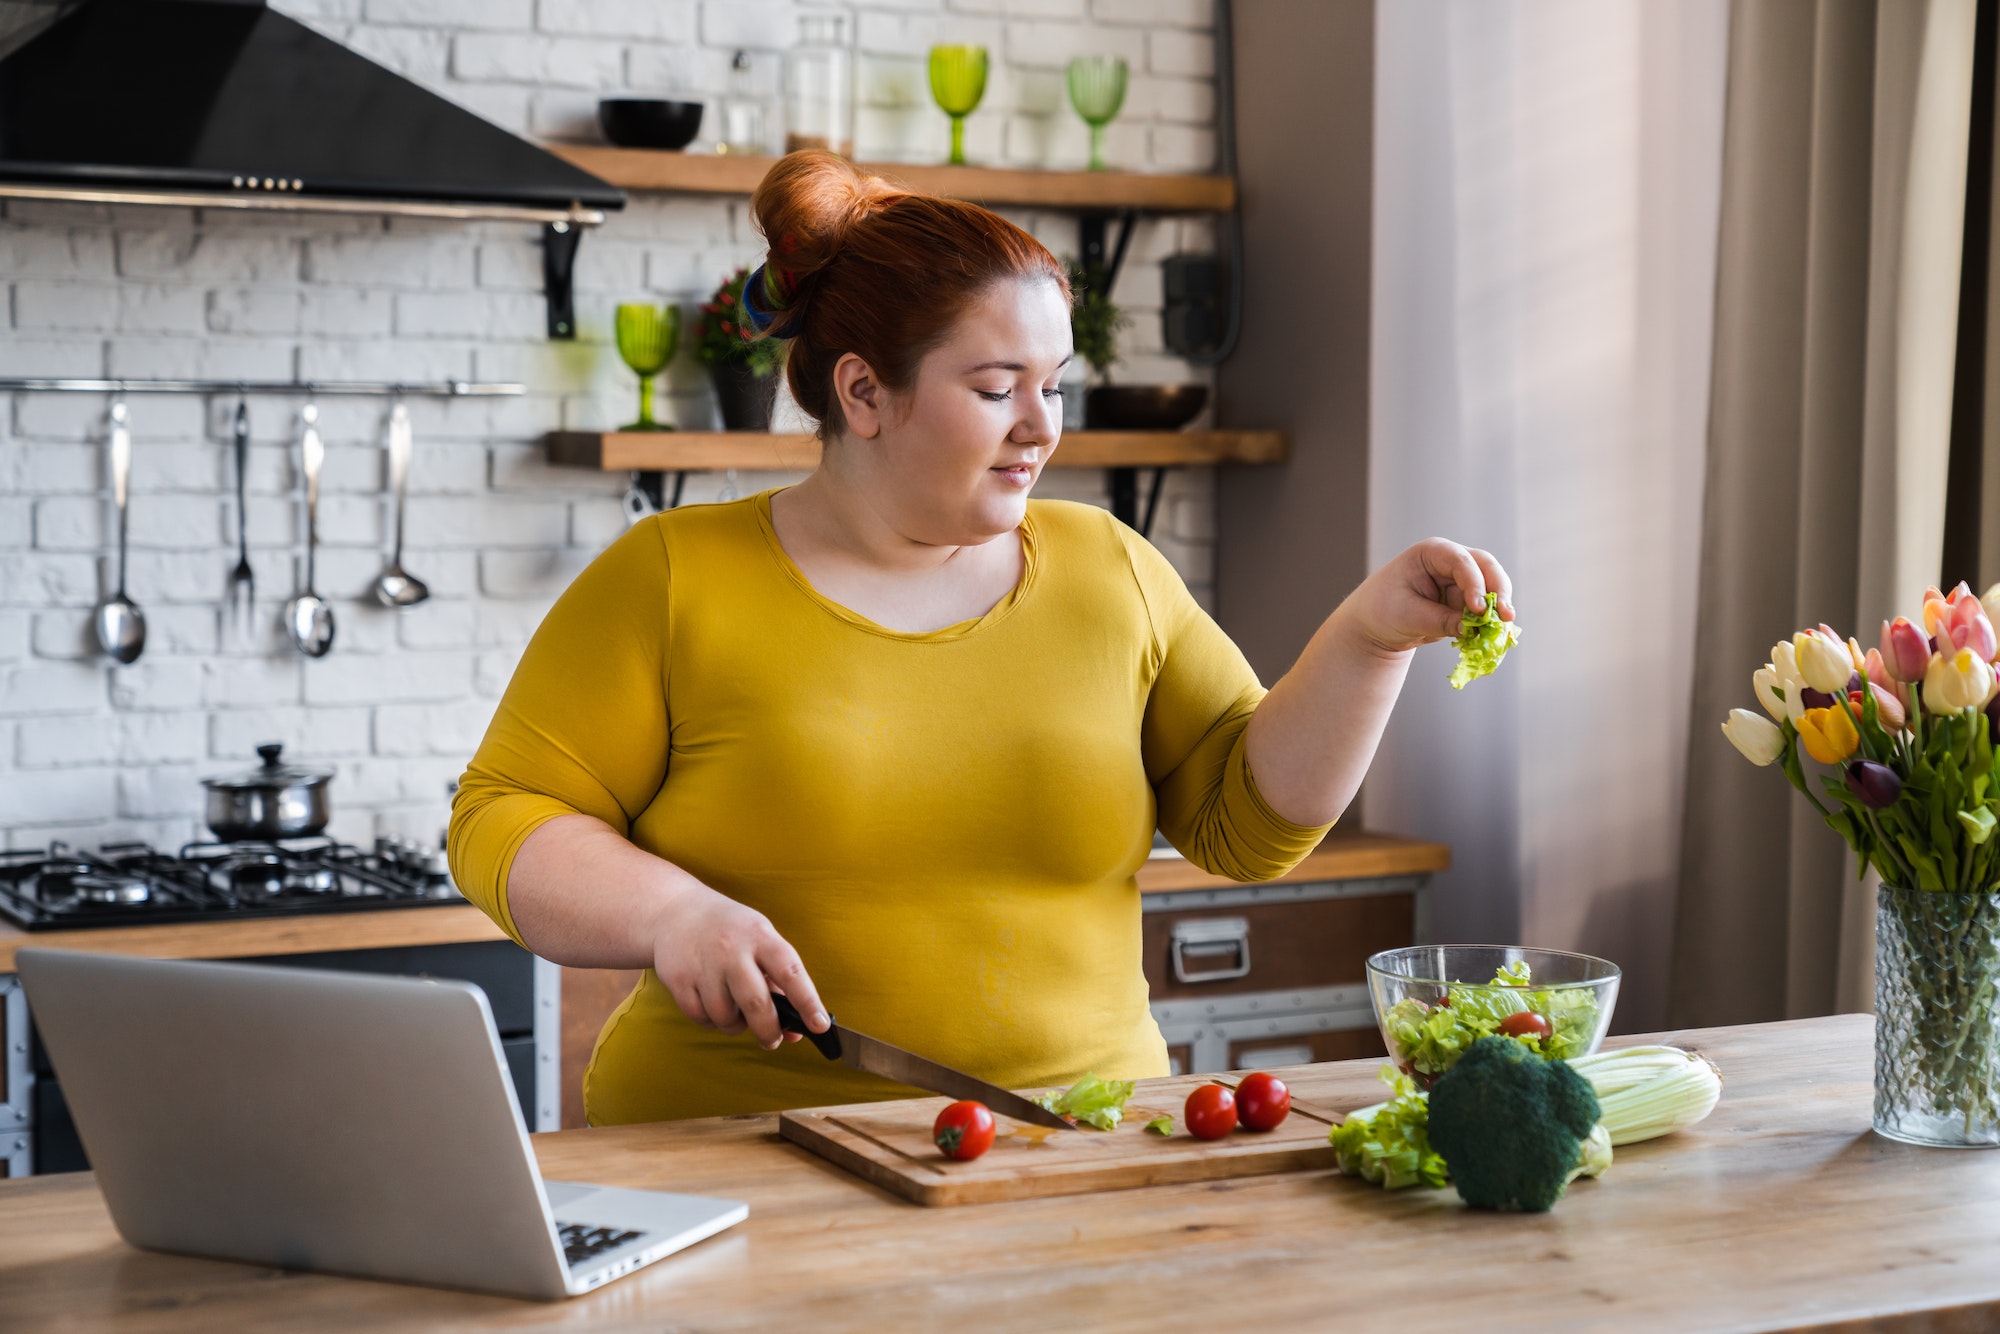 Plus size , fat caucasian woman learning to make salad and healthy food from social media